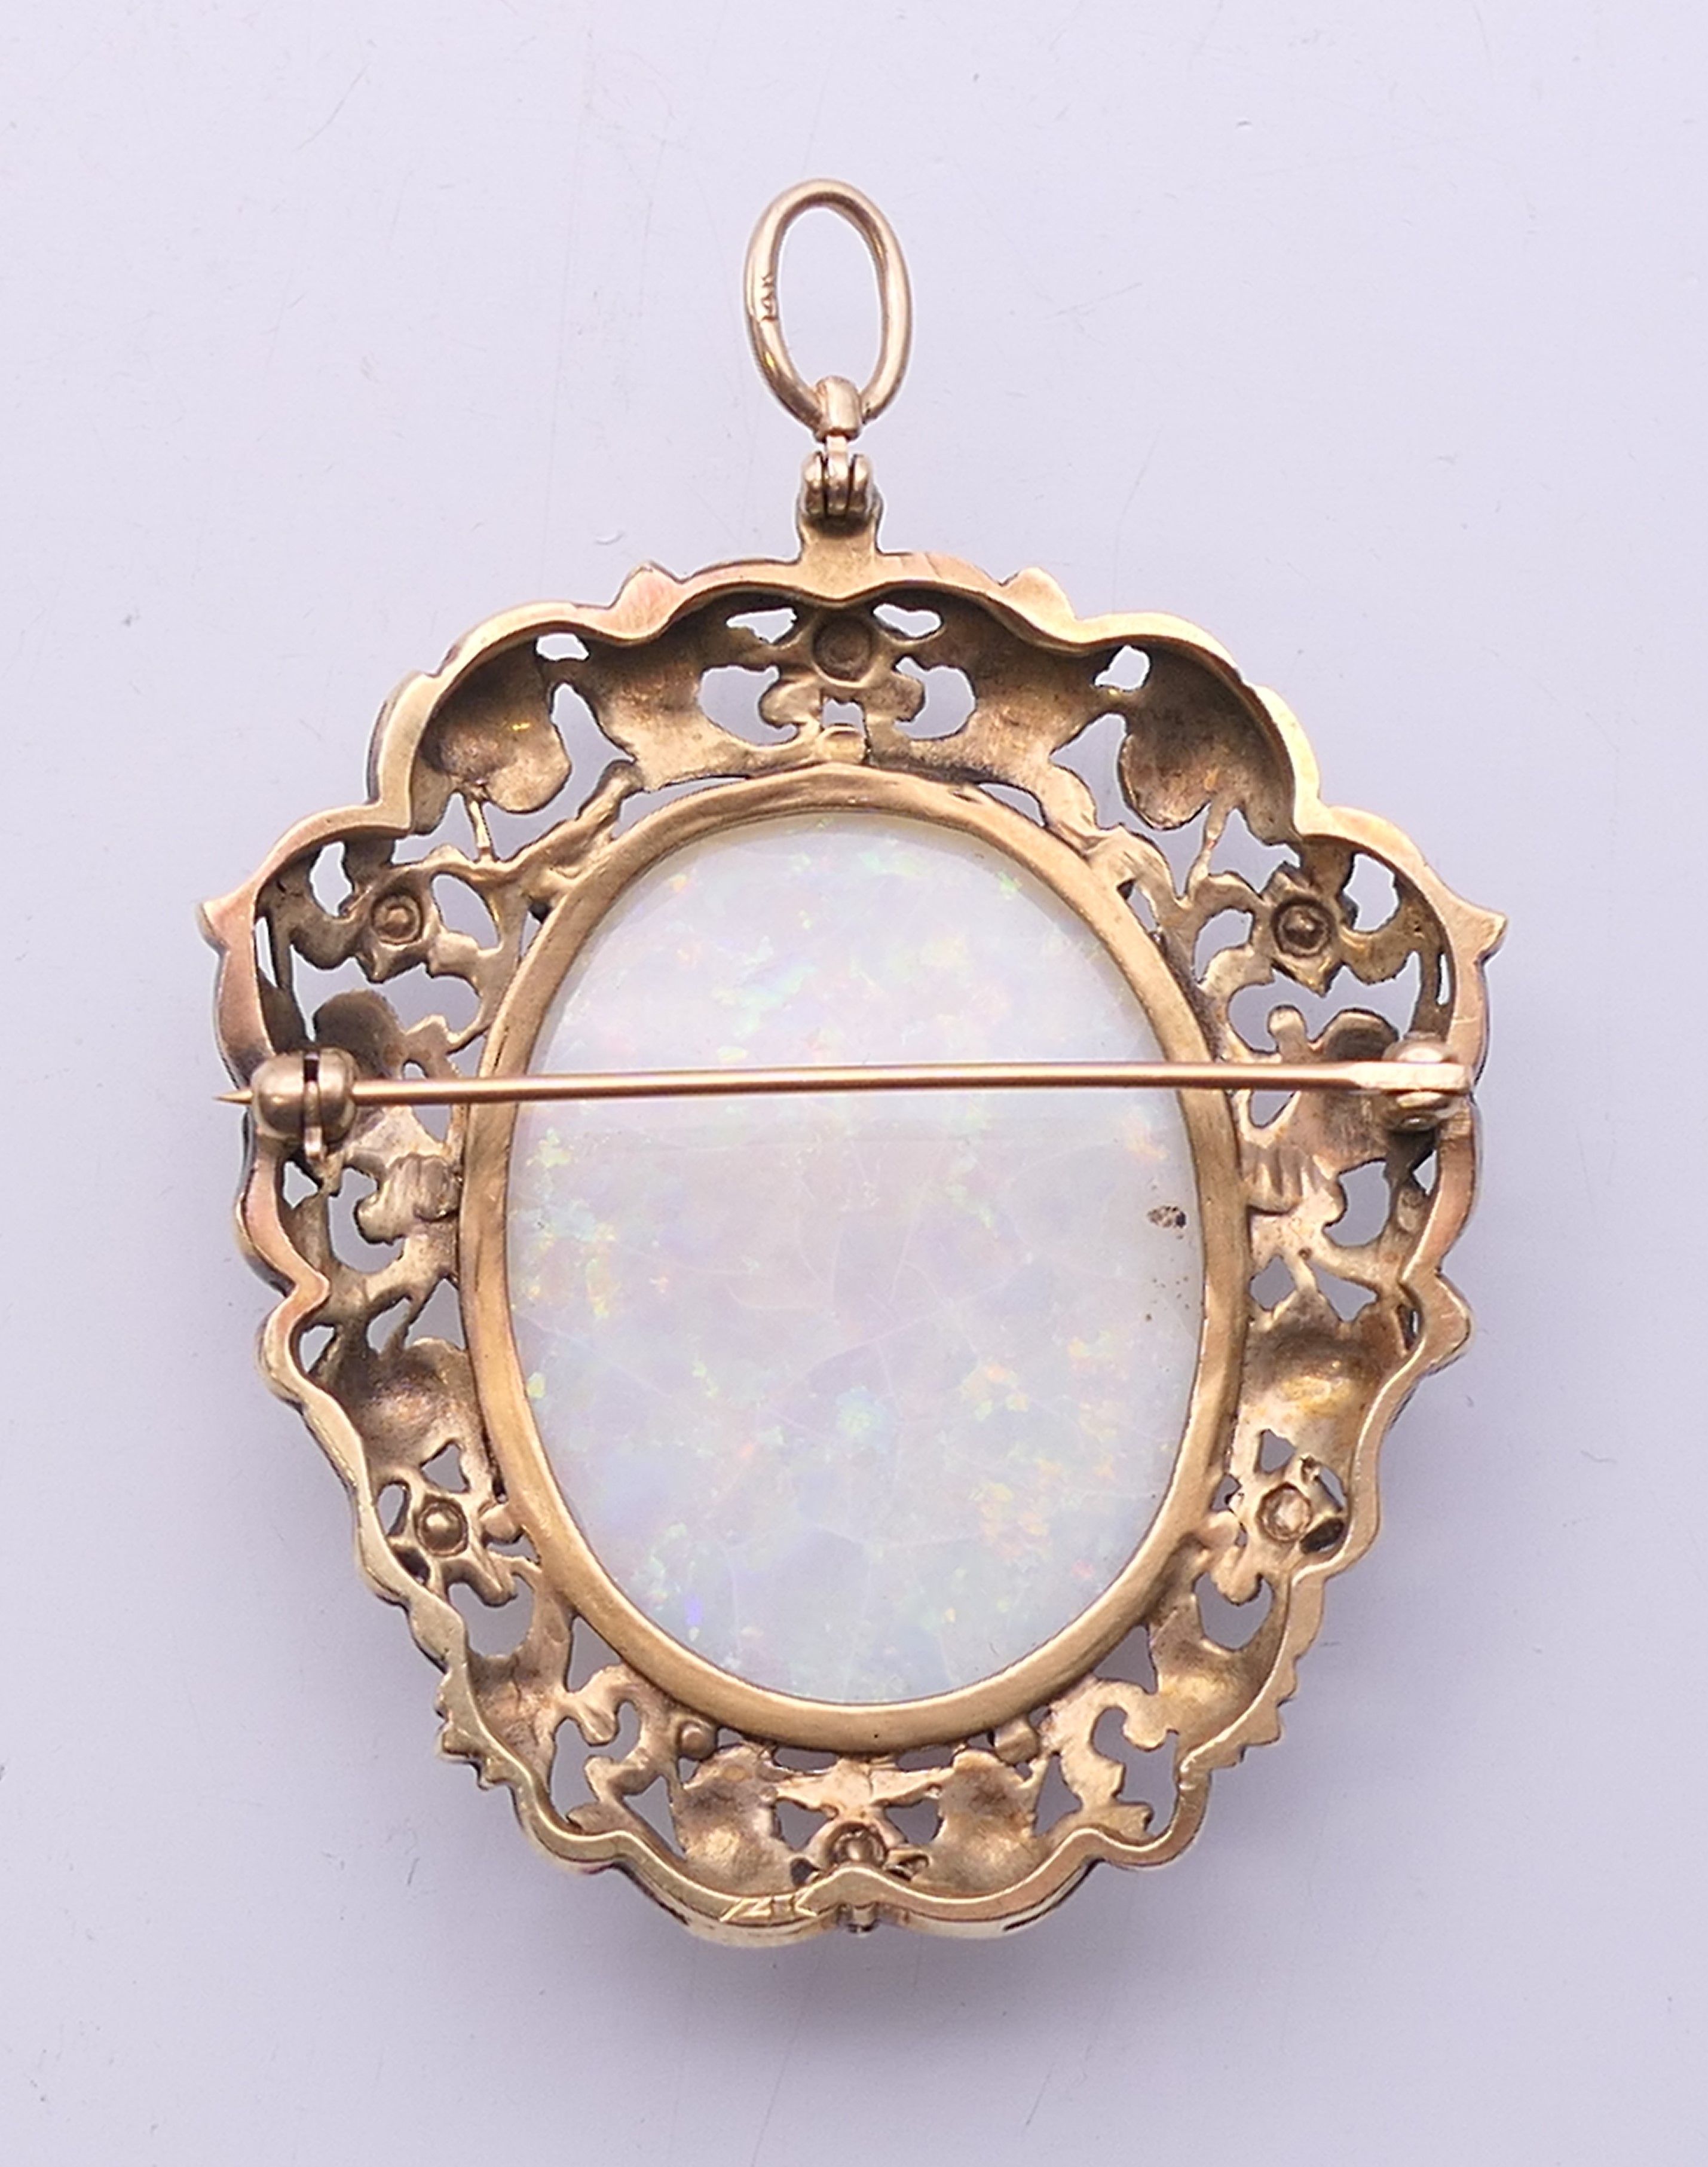 A large opal and gold brooch. 5.5 cm high overall. 15.4 grammes total weight. - Image 3 of 4